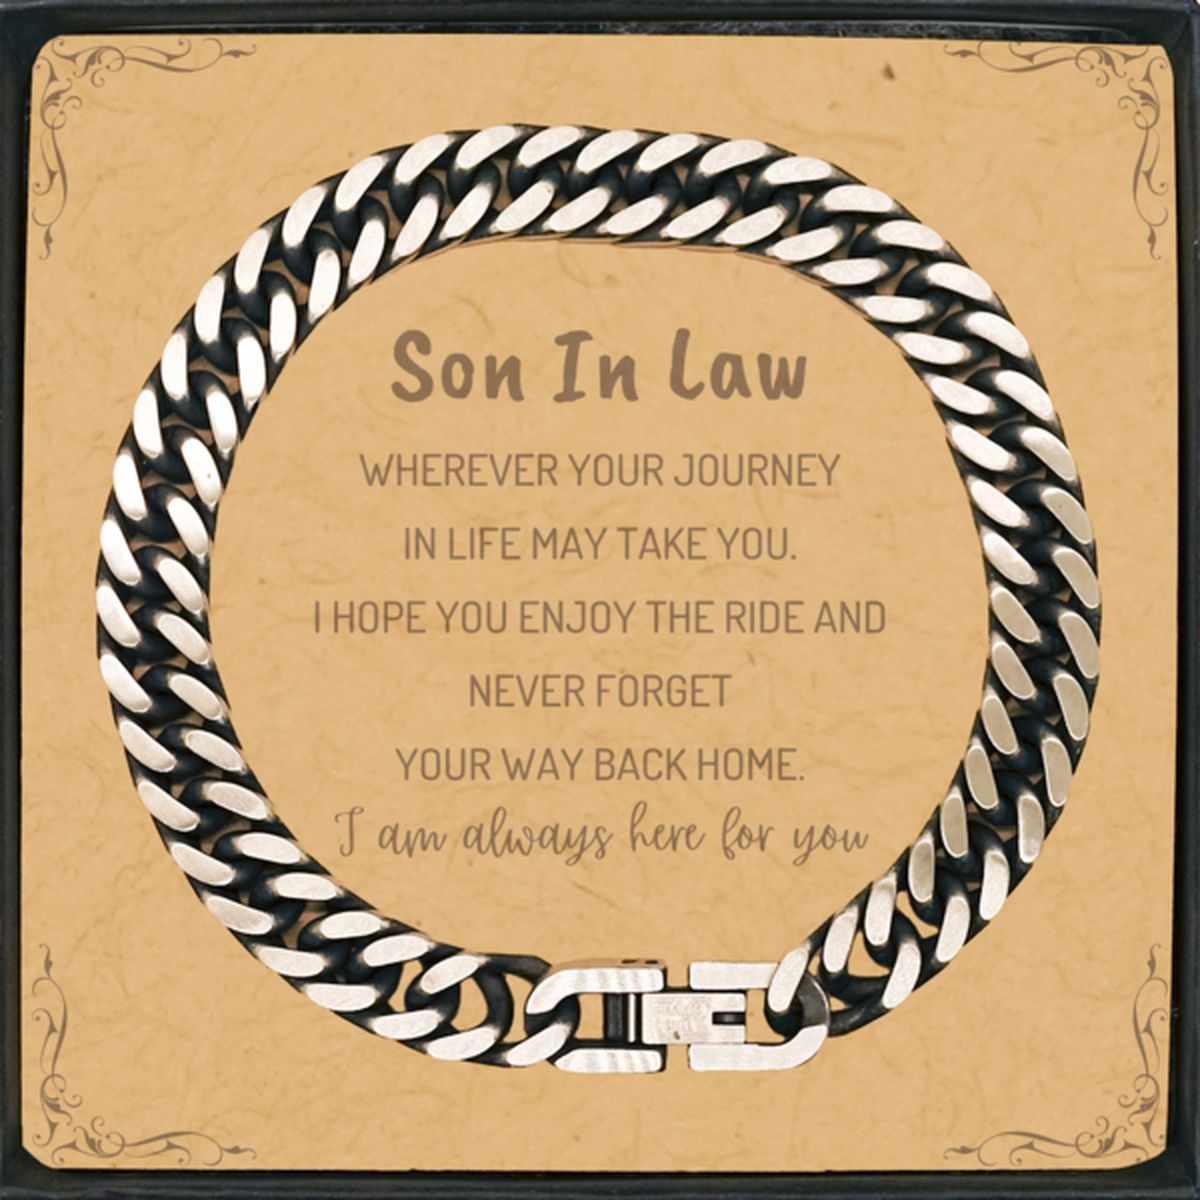 Son In Law wherever your journey in life may take you, I am always here for you Son In Law Cuban Link Chain Bracelet, Awesome Christmas Gifts For Son In Law Message Card, Son In Law Birthday Gifts for Men Women Family Loved One